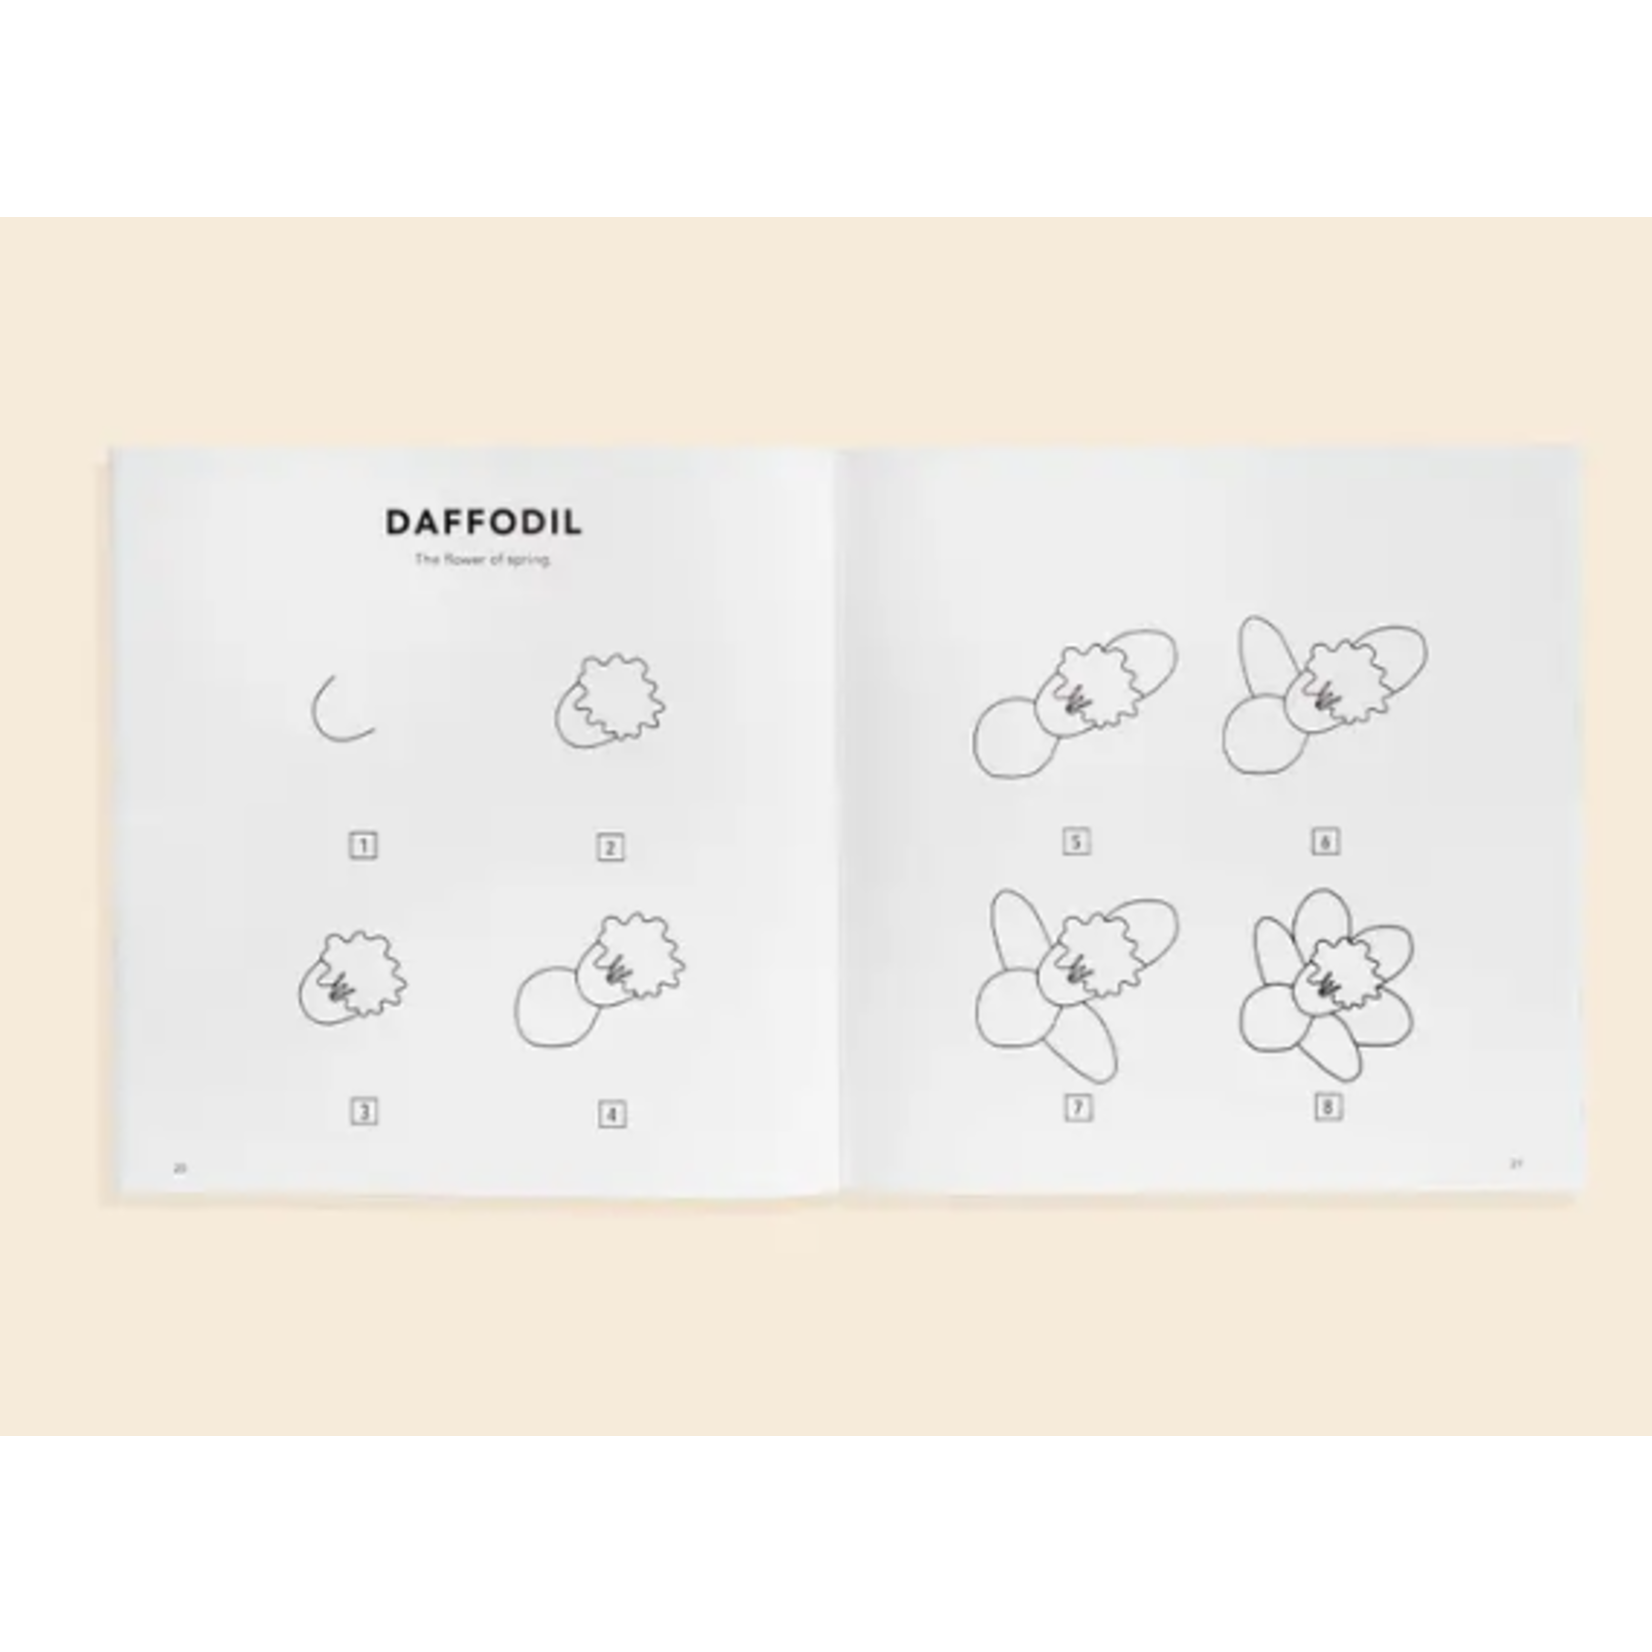 Penguin Random House Paige Tate & Co Modern Flowers: A How to Draw Book for Kids